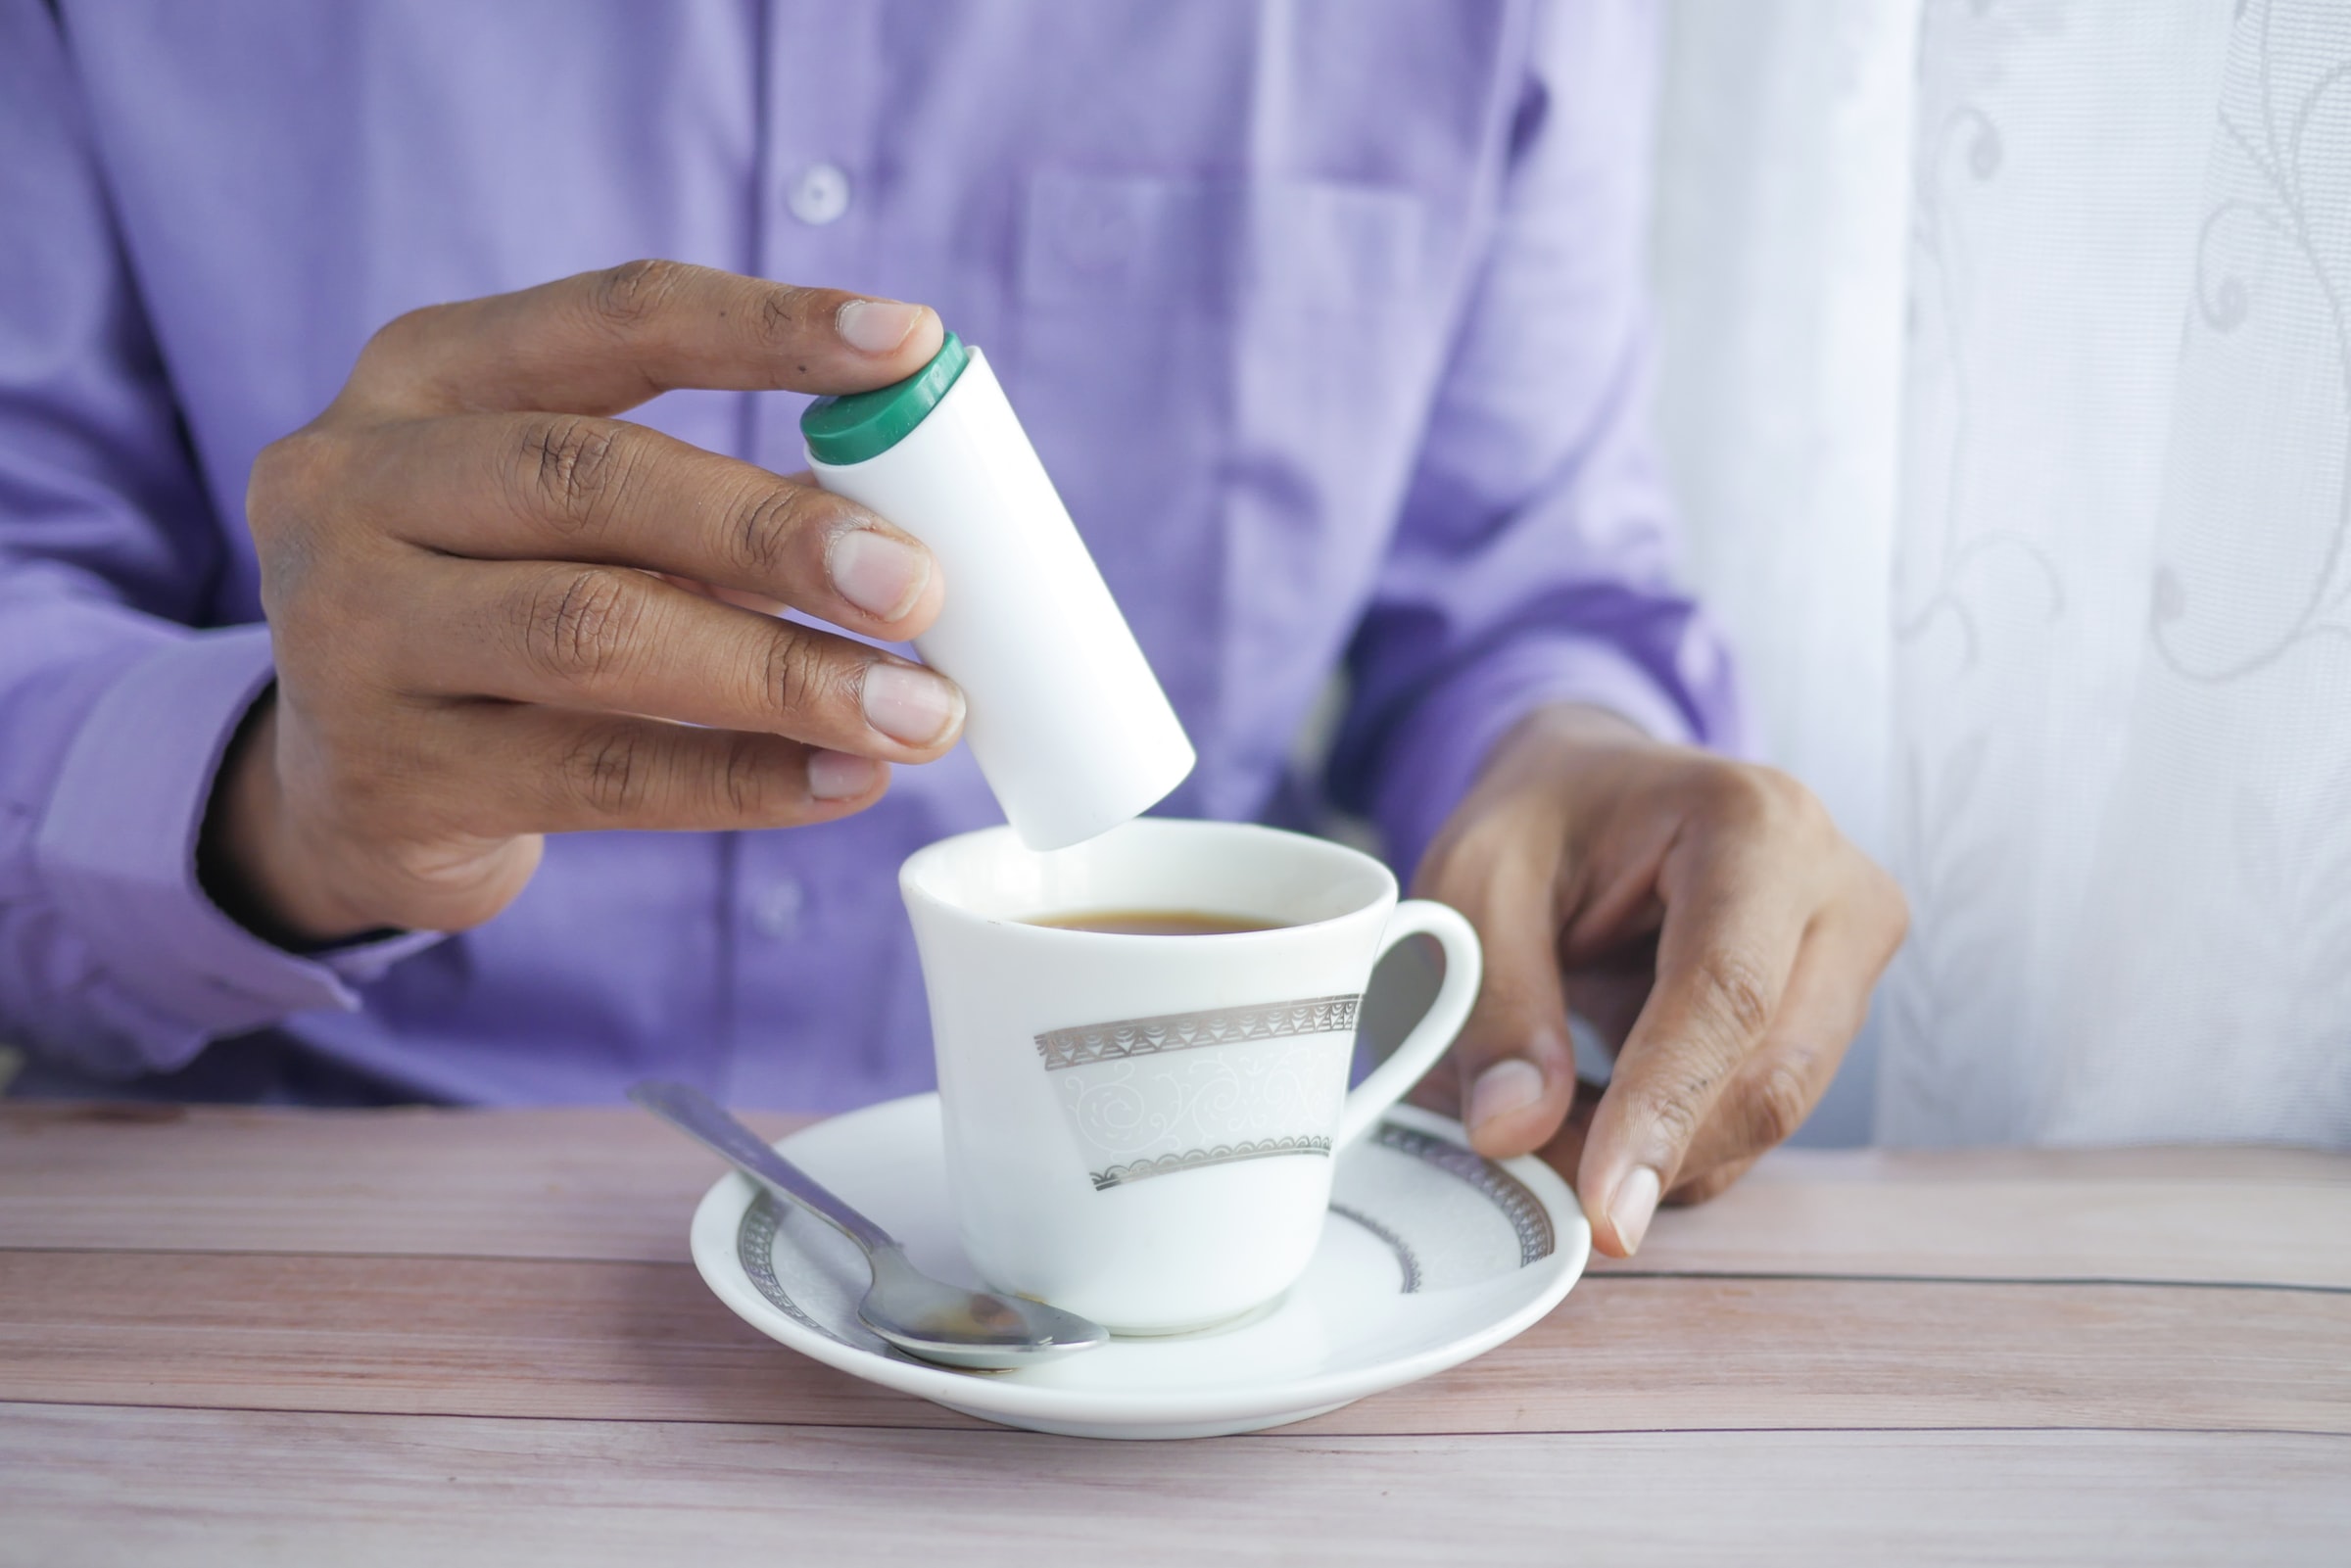 A black man wearing a purple shirt pouring sugar into his cup of tea